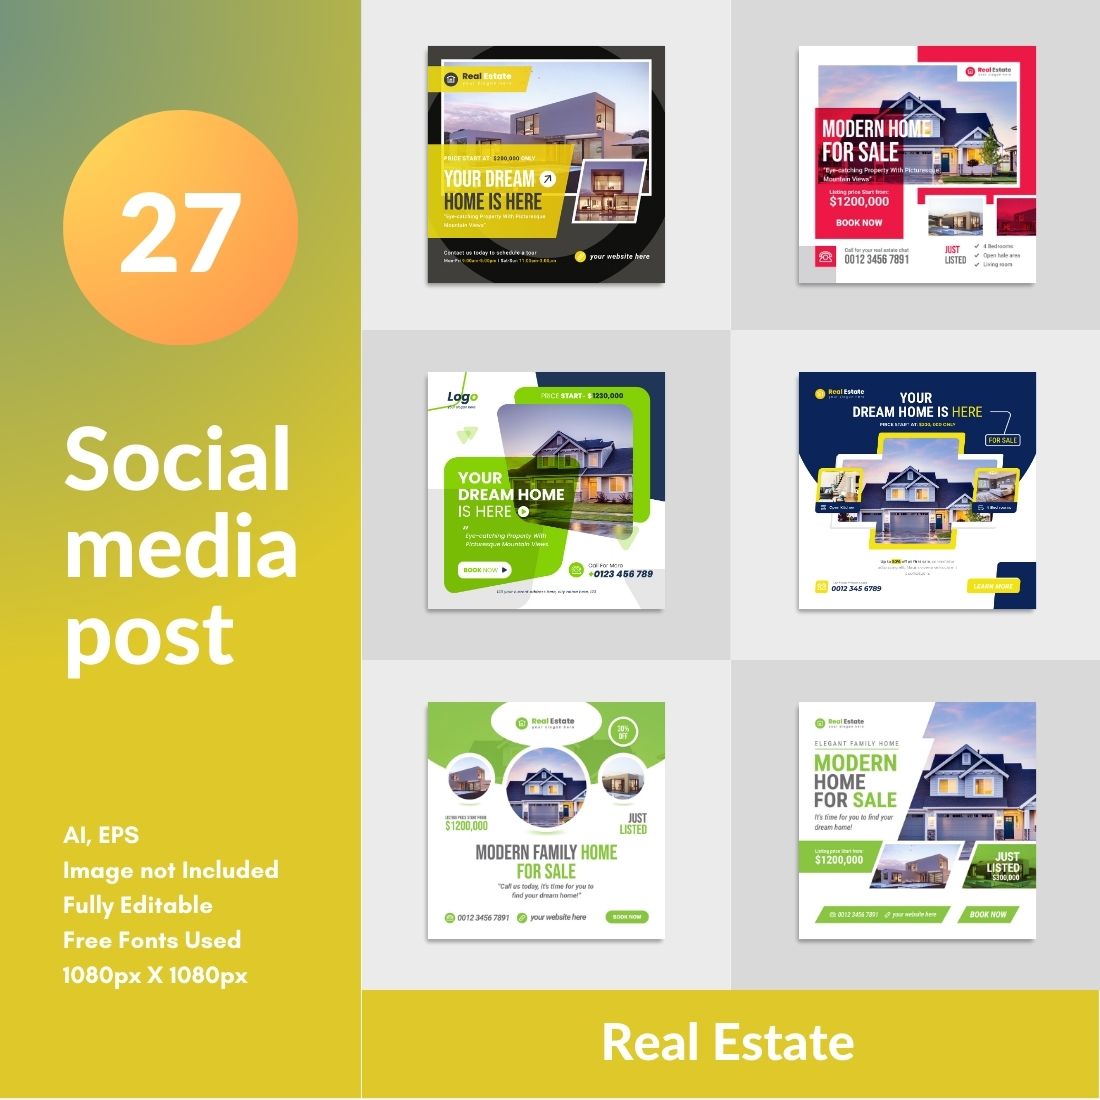 Social media posts Template for real estate agents cover image.